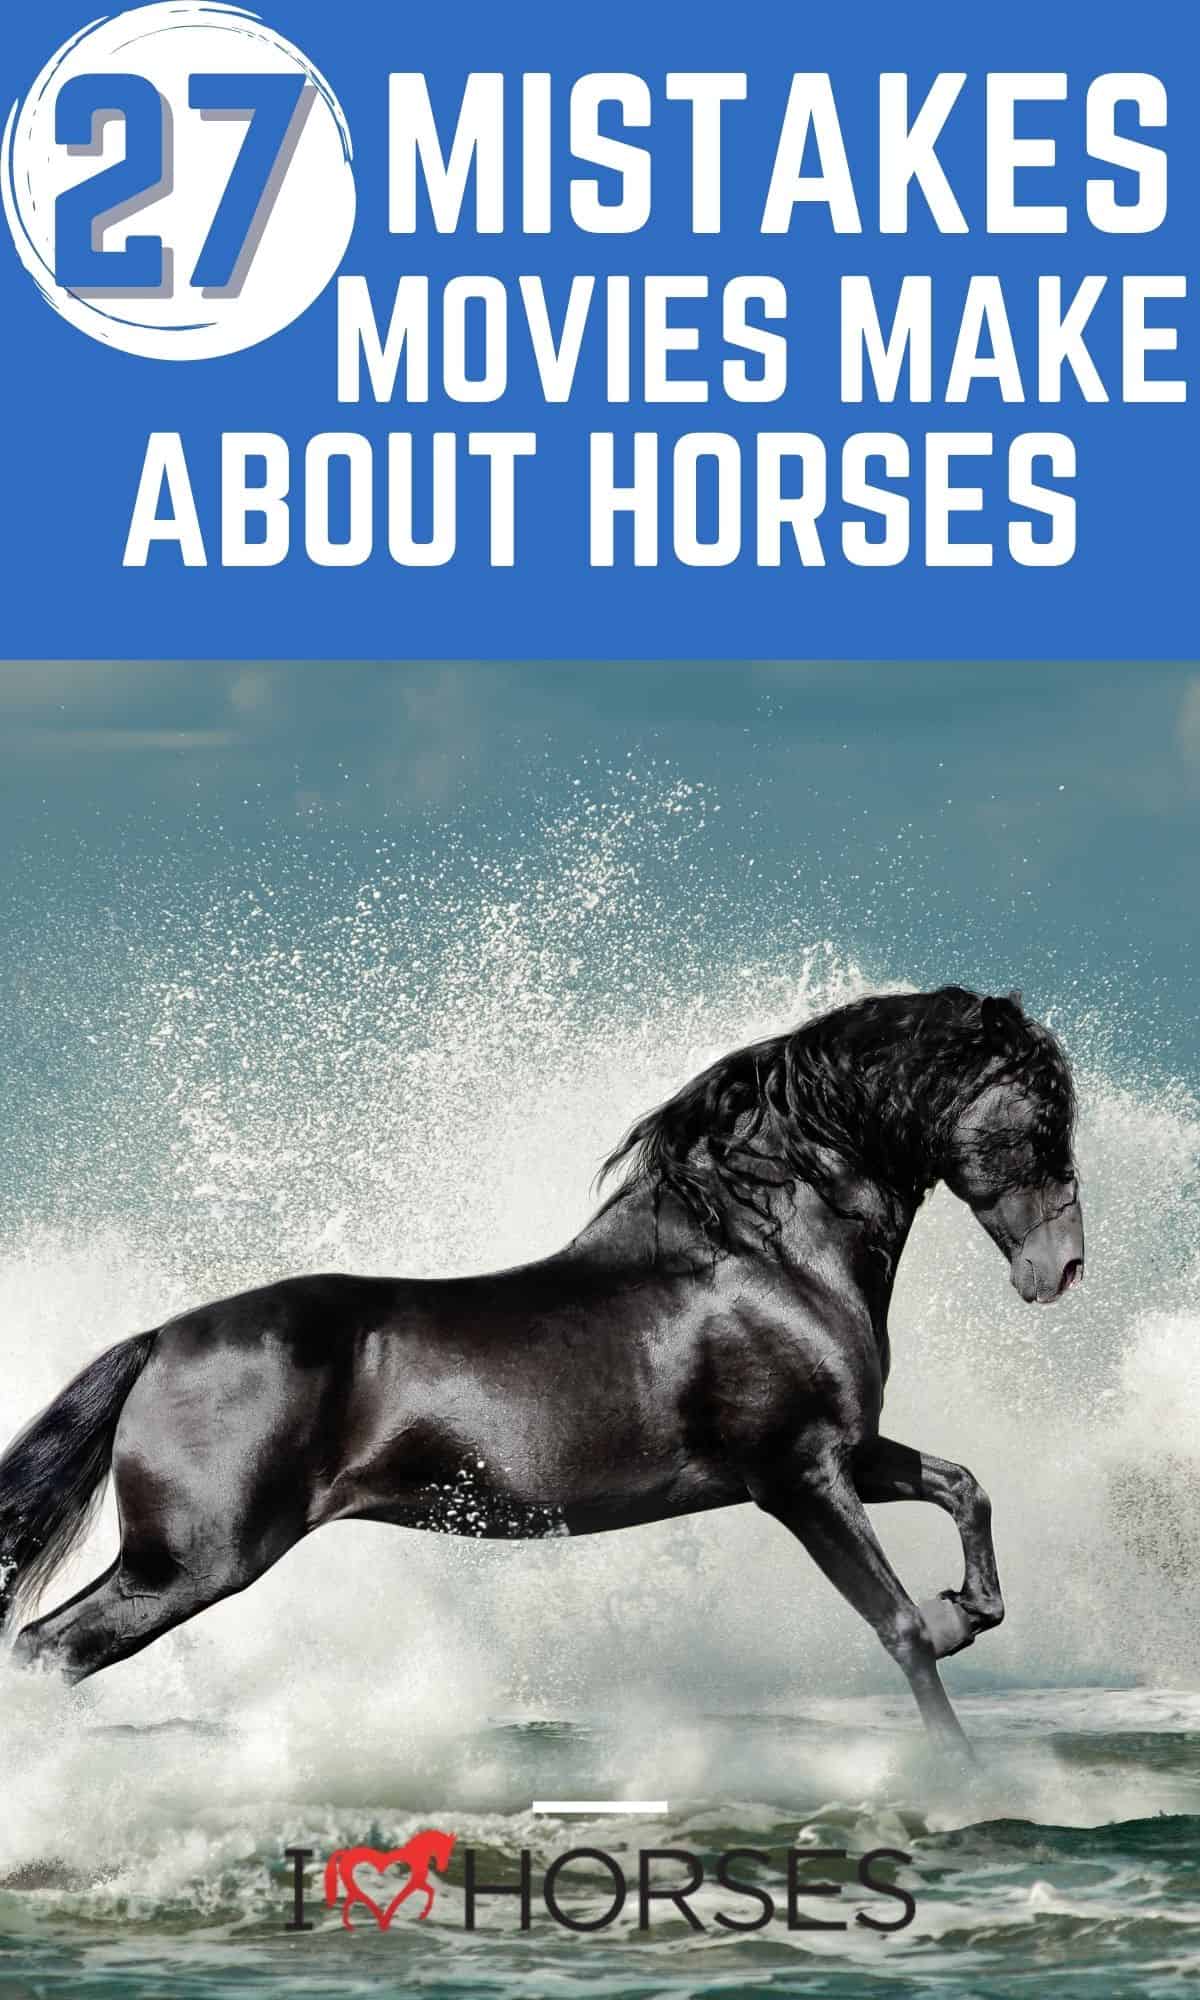 Pinterest image with title in blue overlay and black horse in water below